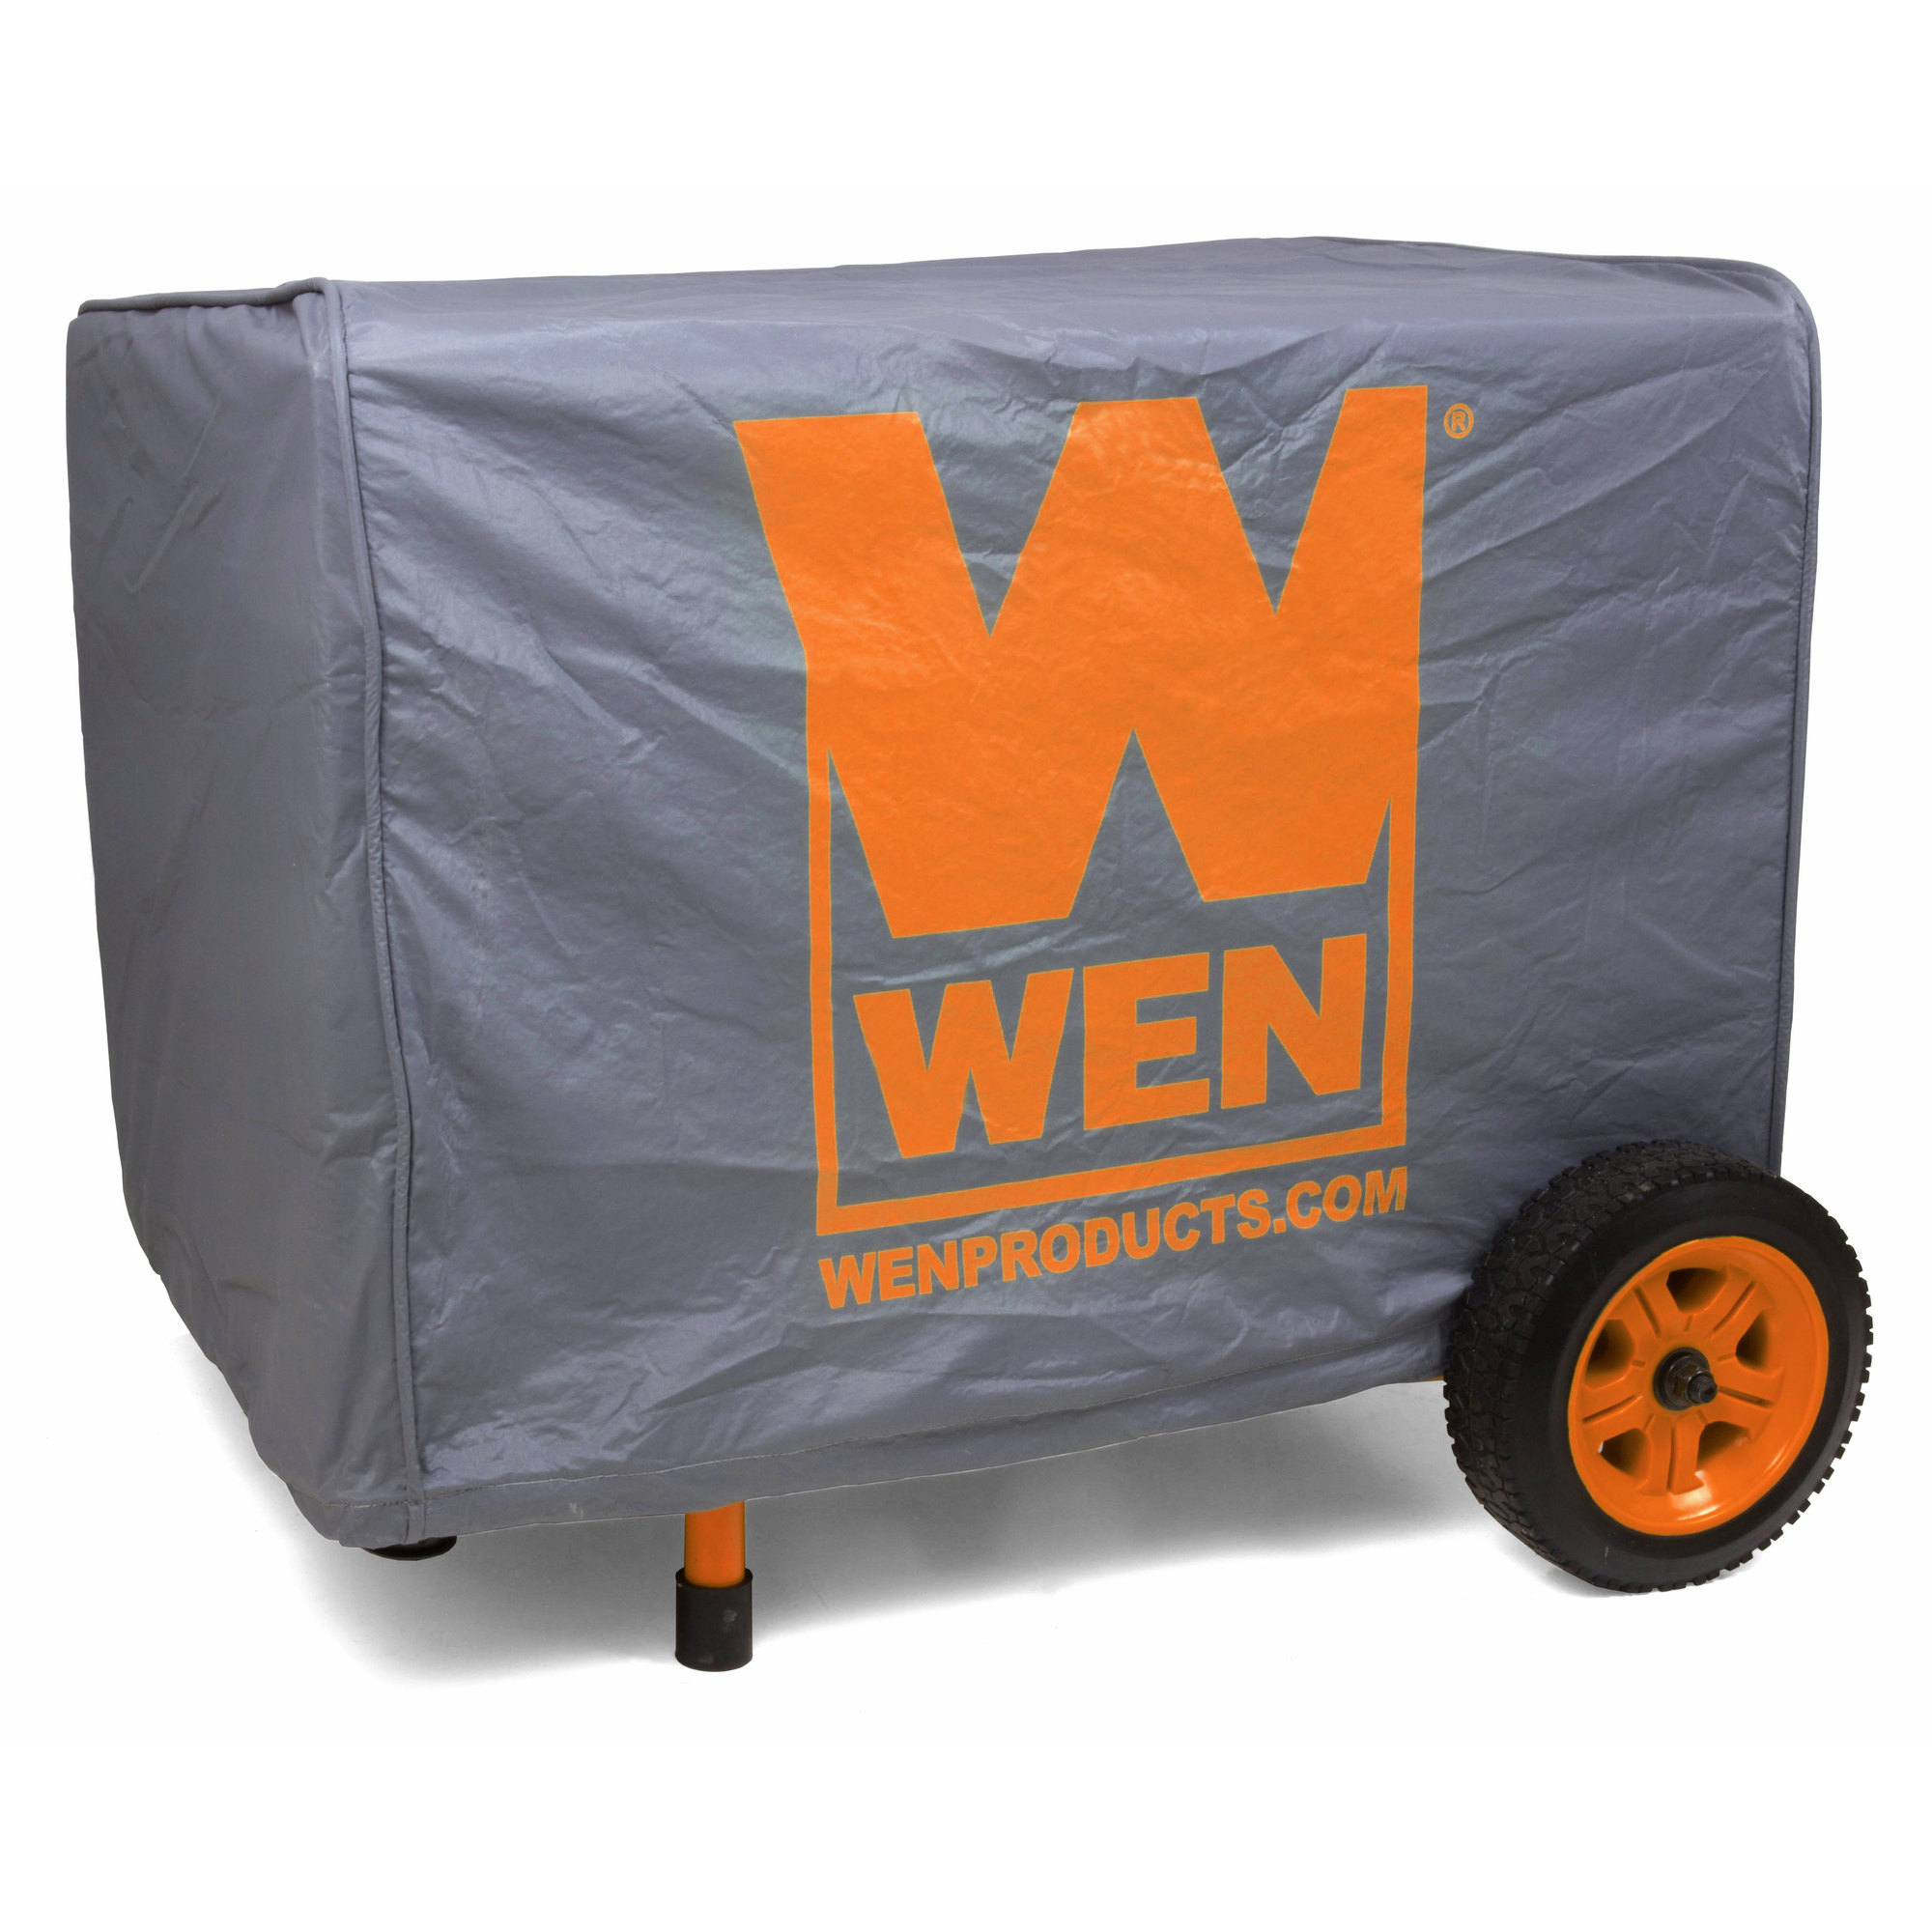 WEN, Medium Generator Cover, Material Vinyl, Closure Type Other, Compatible With Other, Model 56406